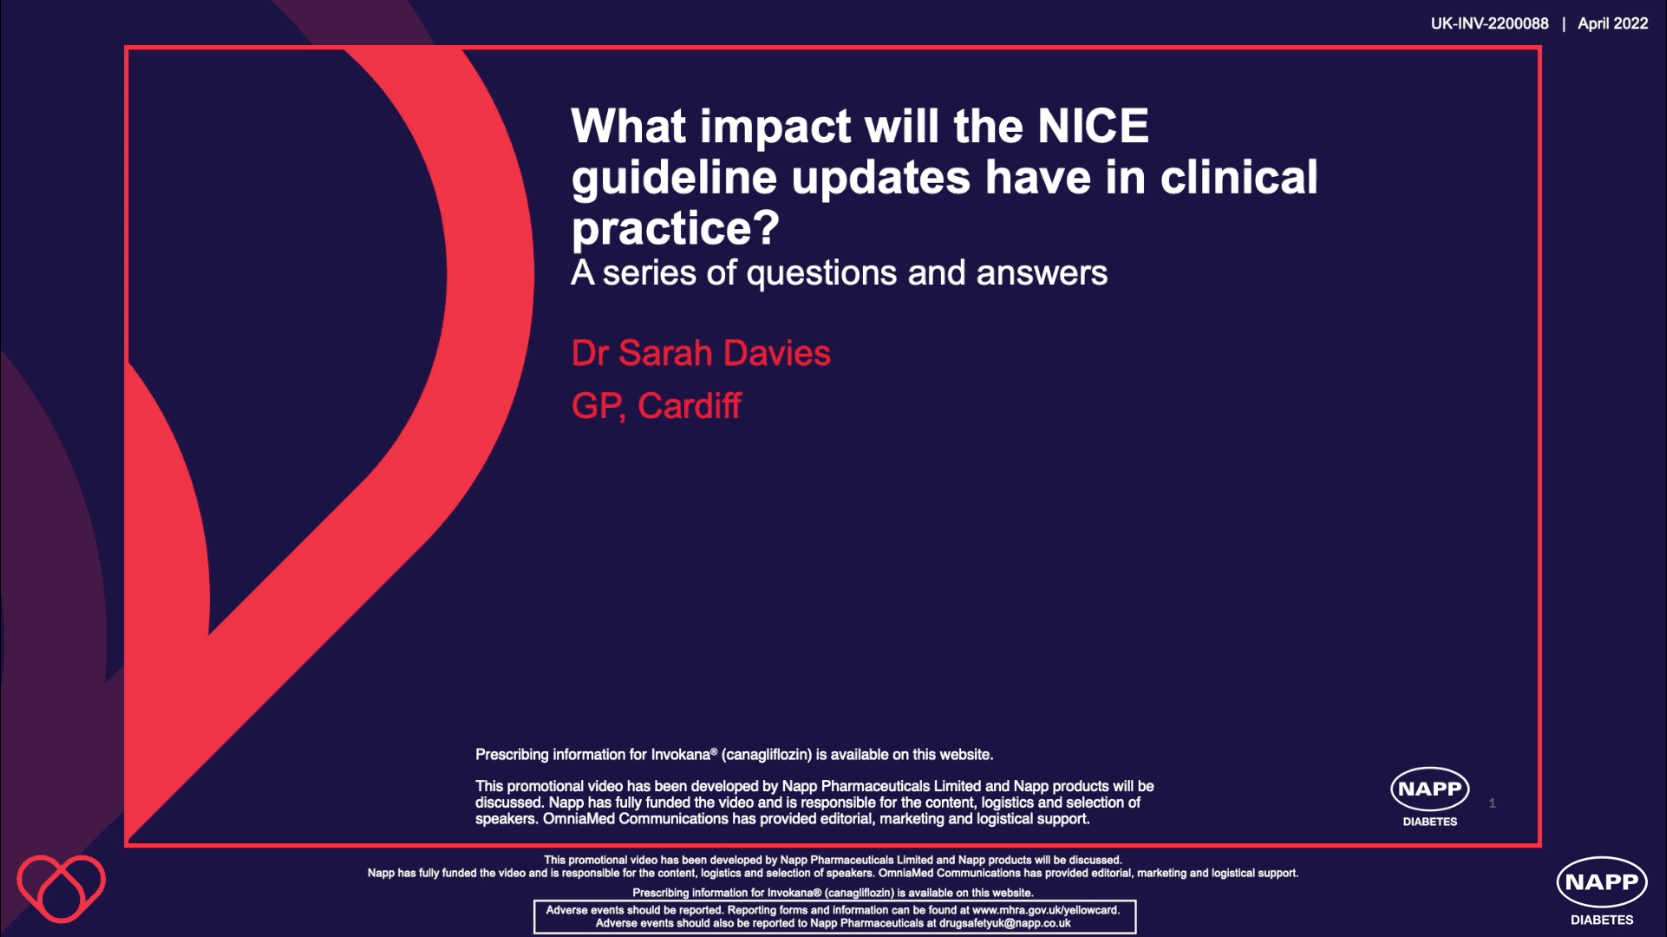 Dr. Sarah Davies discusses what impact will the NICE Guideline updates have in clinical practice